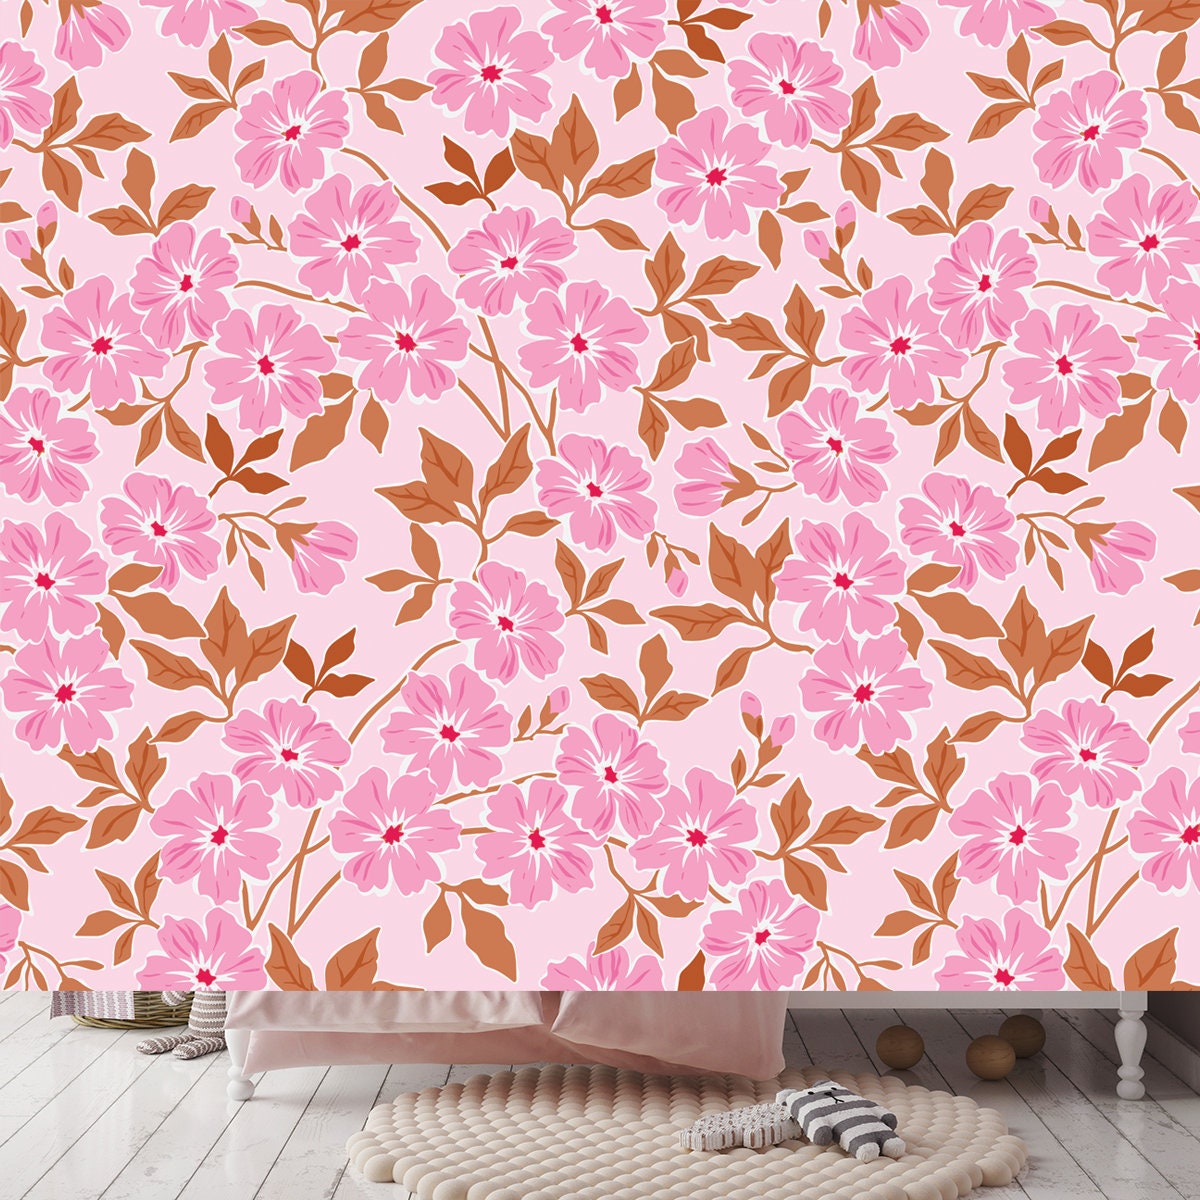 Trendy Seamless Vector Floral Pattern. Endless Print Made of Small Pink Flowers and Leaves Wallpaper Girl Bedroom Mural